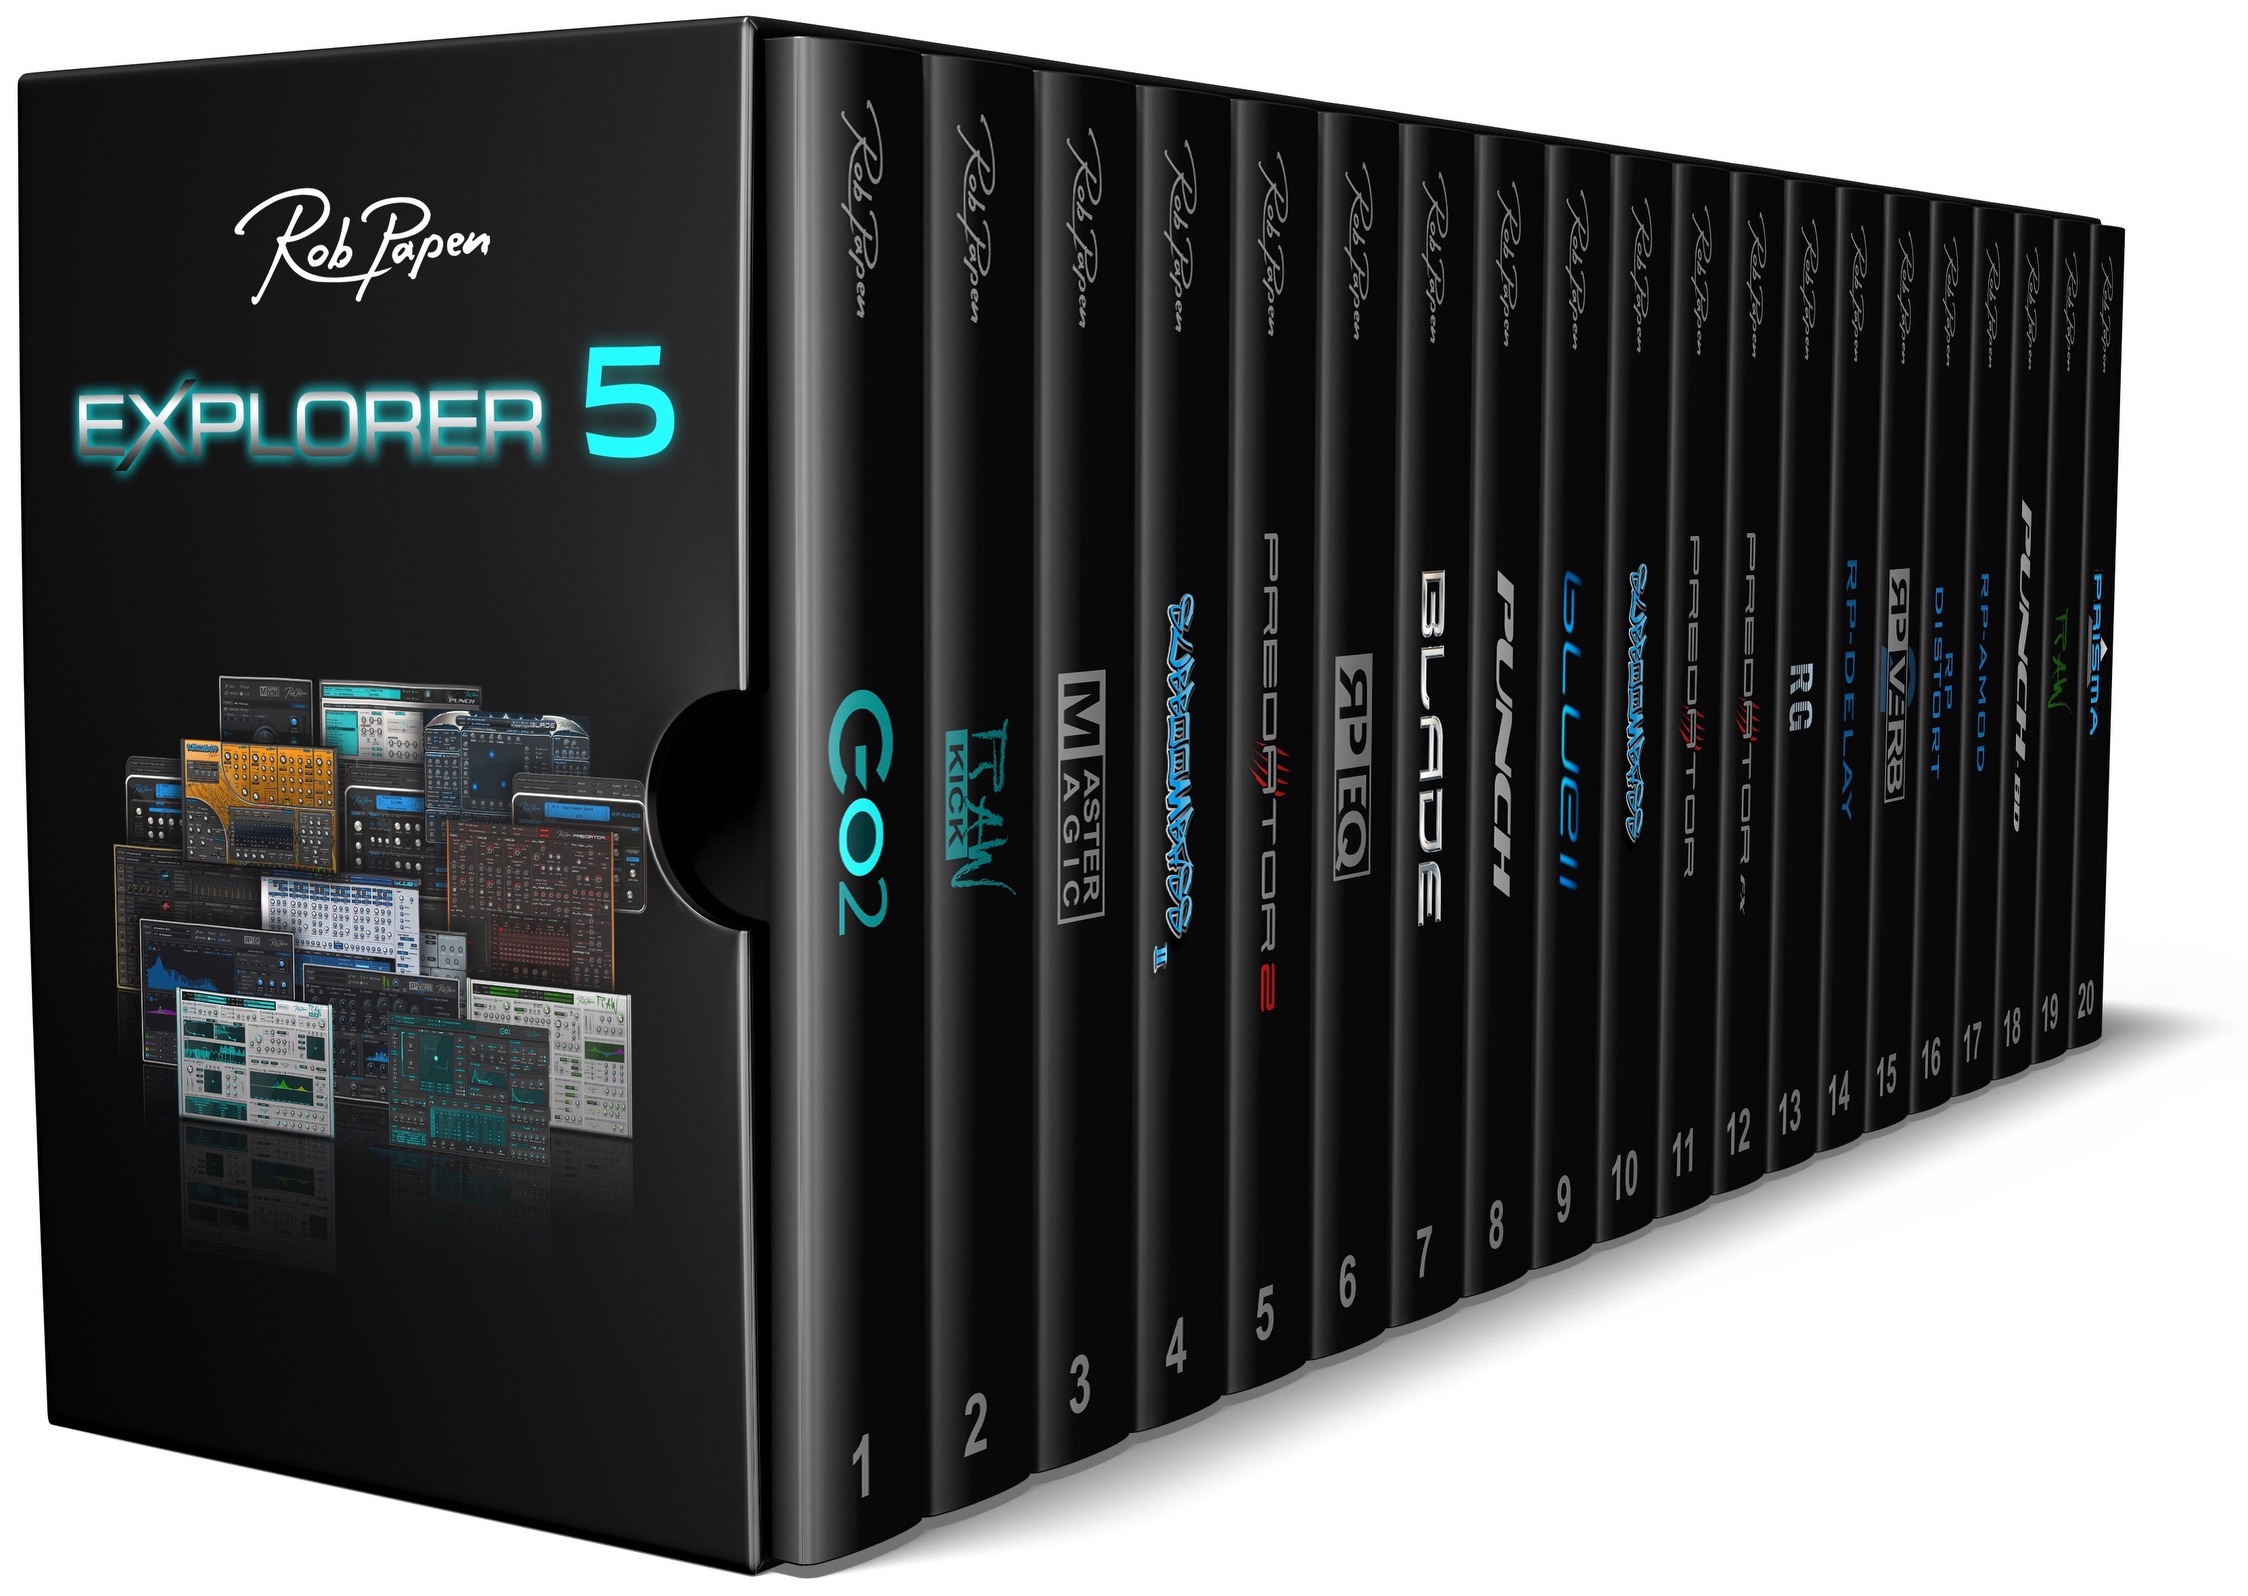 Review: eXplorer5 by Rob Papen